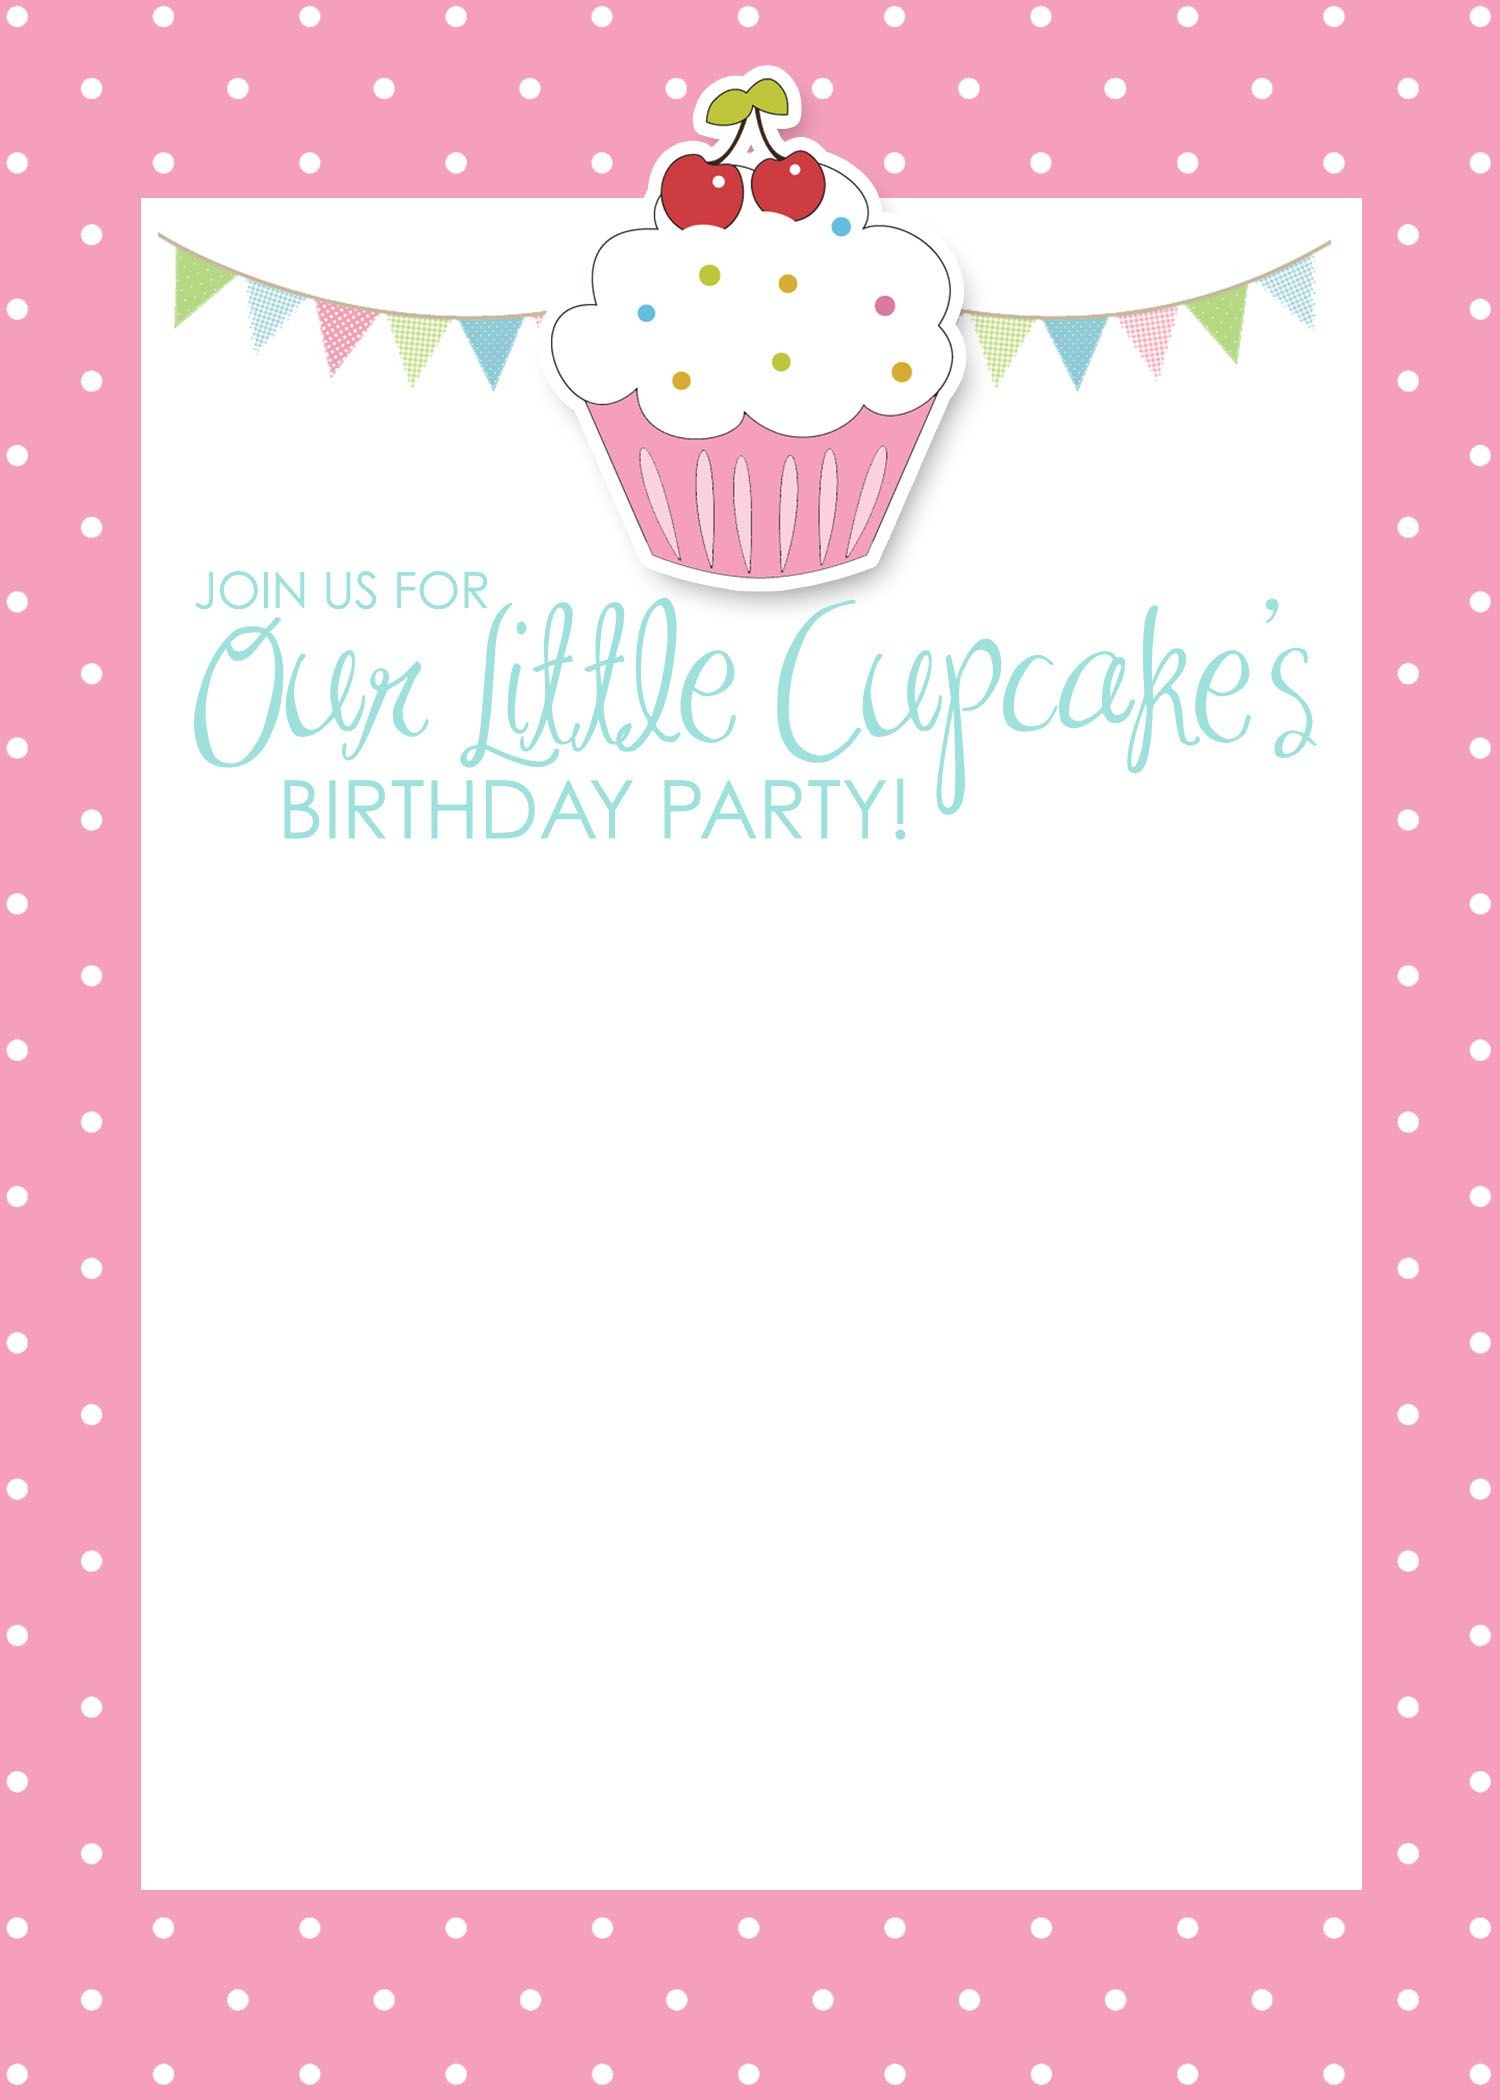 Cupcake Birthday Party With Free Printables | Birthday | Free - Free Printable Polka Dot Birthday Party Invitations